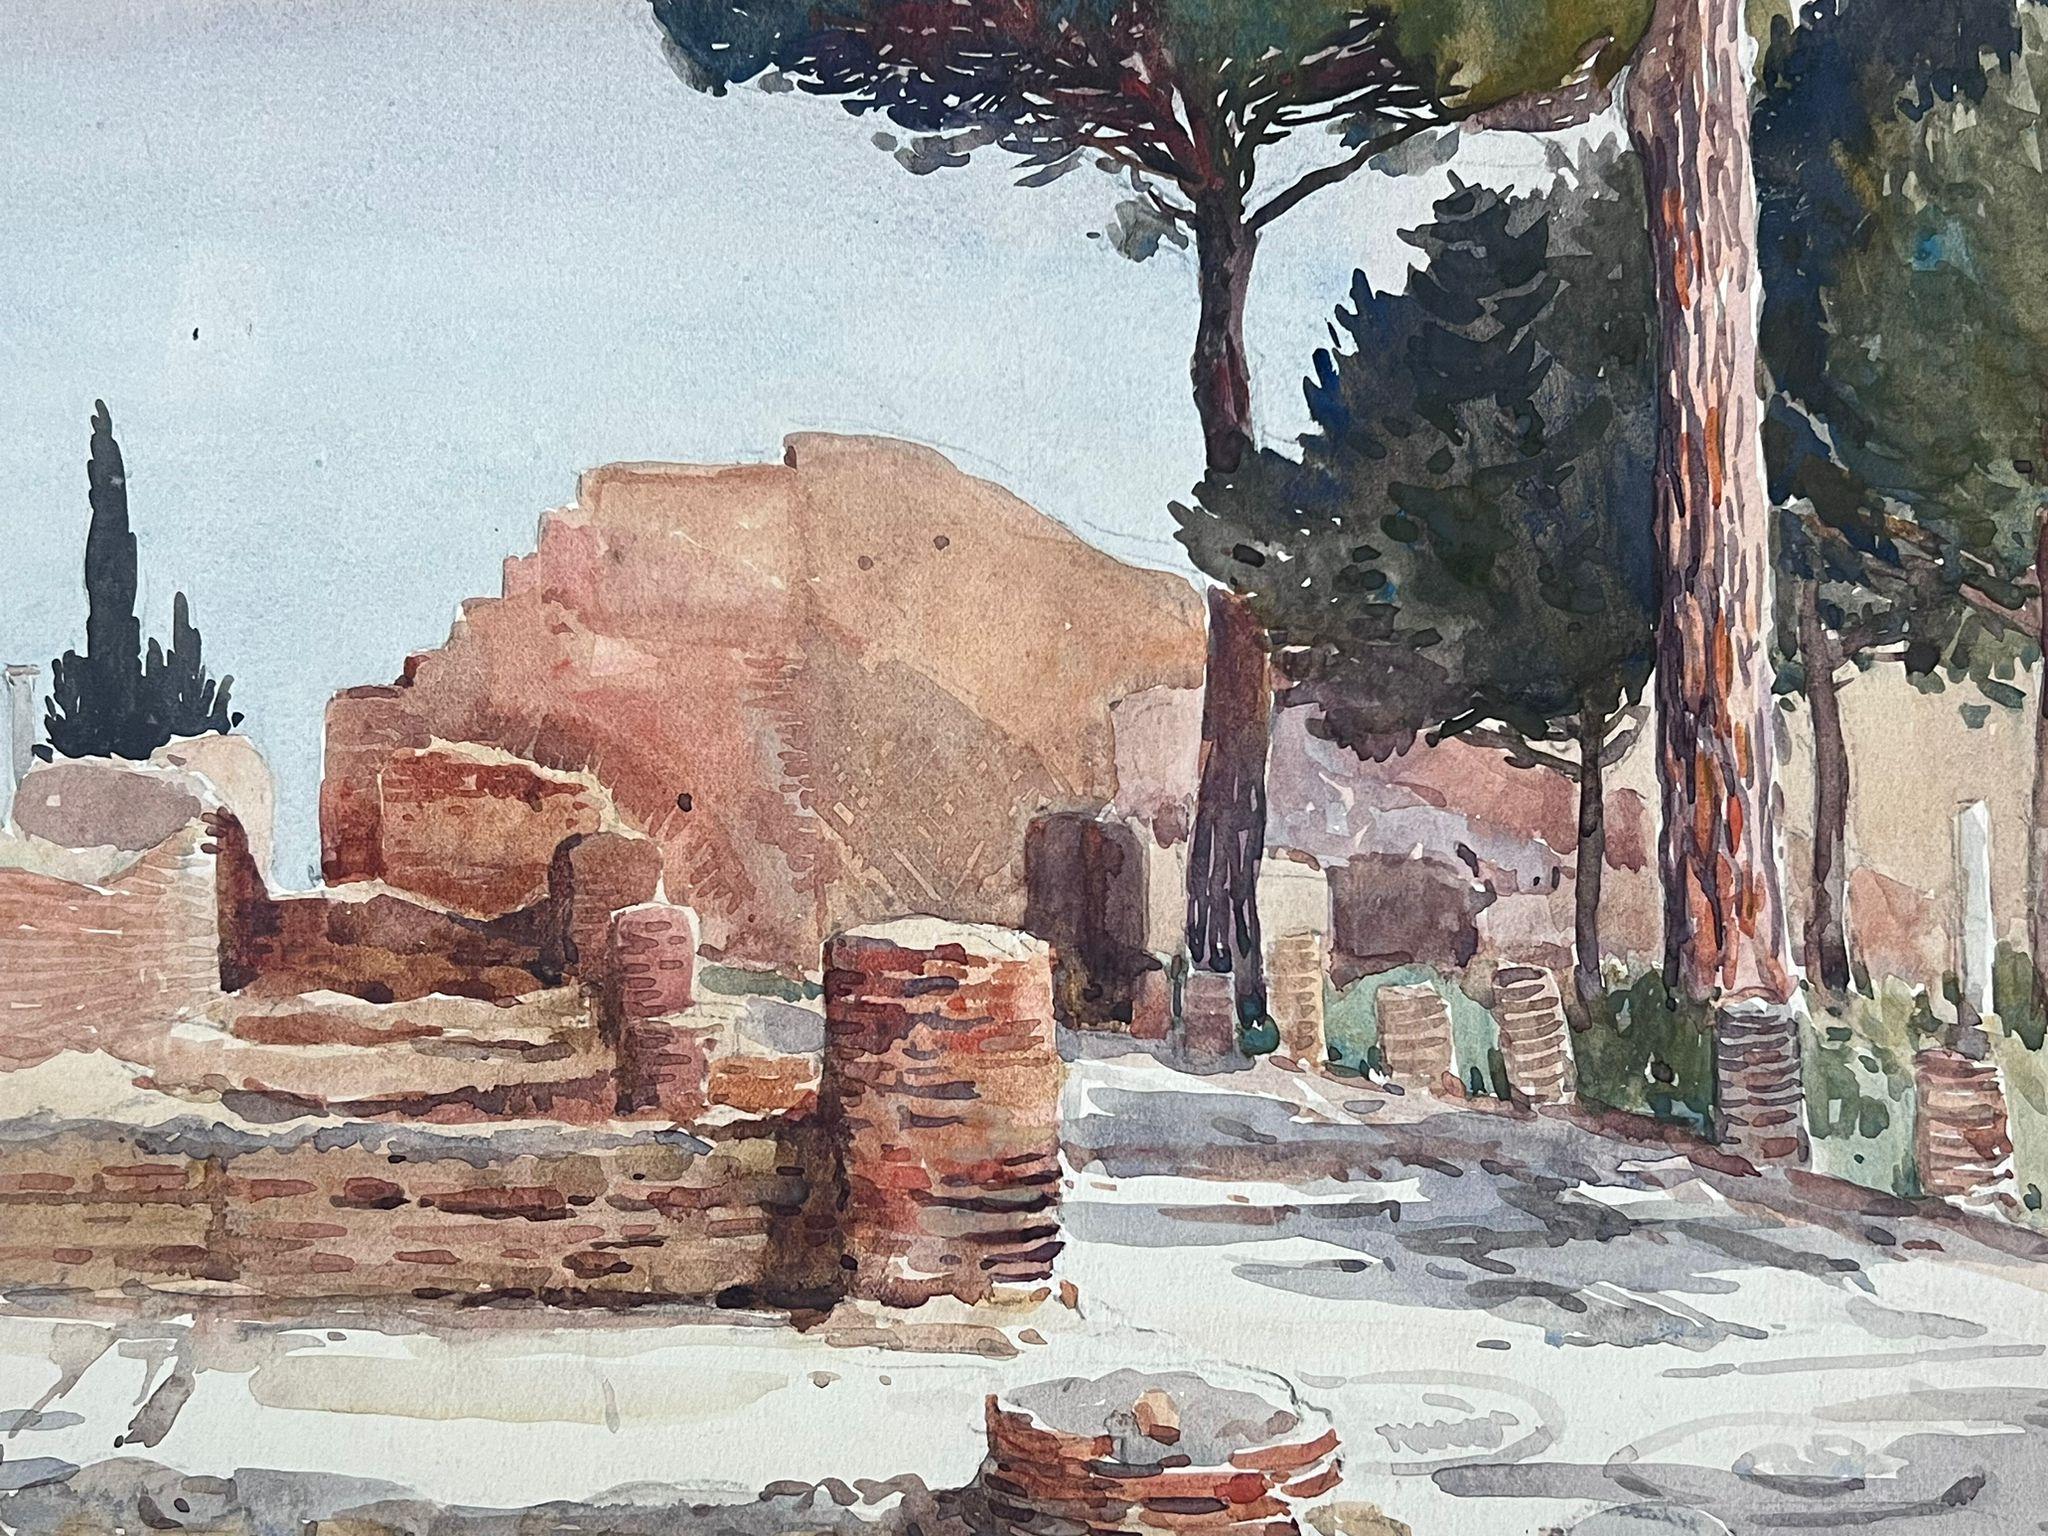 Jean La Forgue (French 1901-1975) signed watercolour on paper, unframed
inscribed verso
painting: 10.75 x 15 inches
provenance: the artists estate, France
condition: very good and sound condition; there are minor age related marks and stains to the